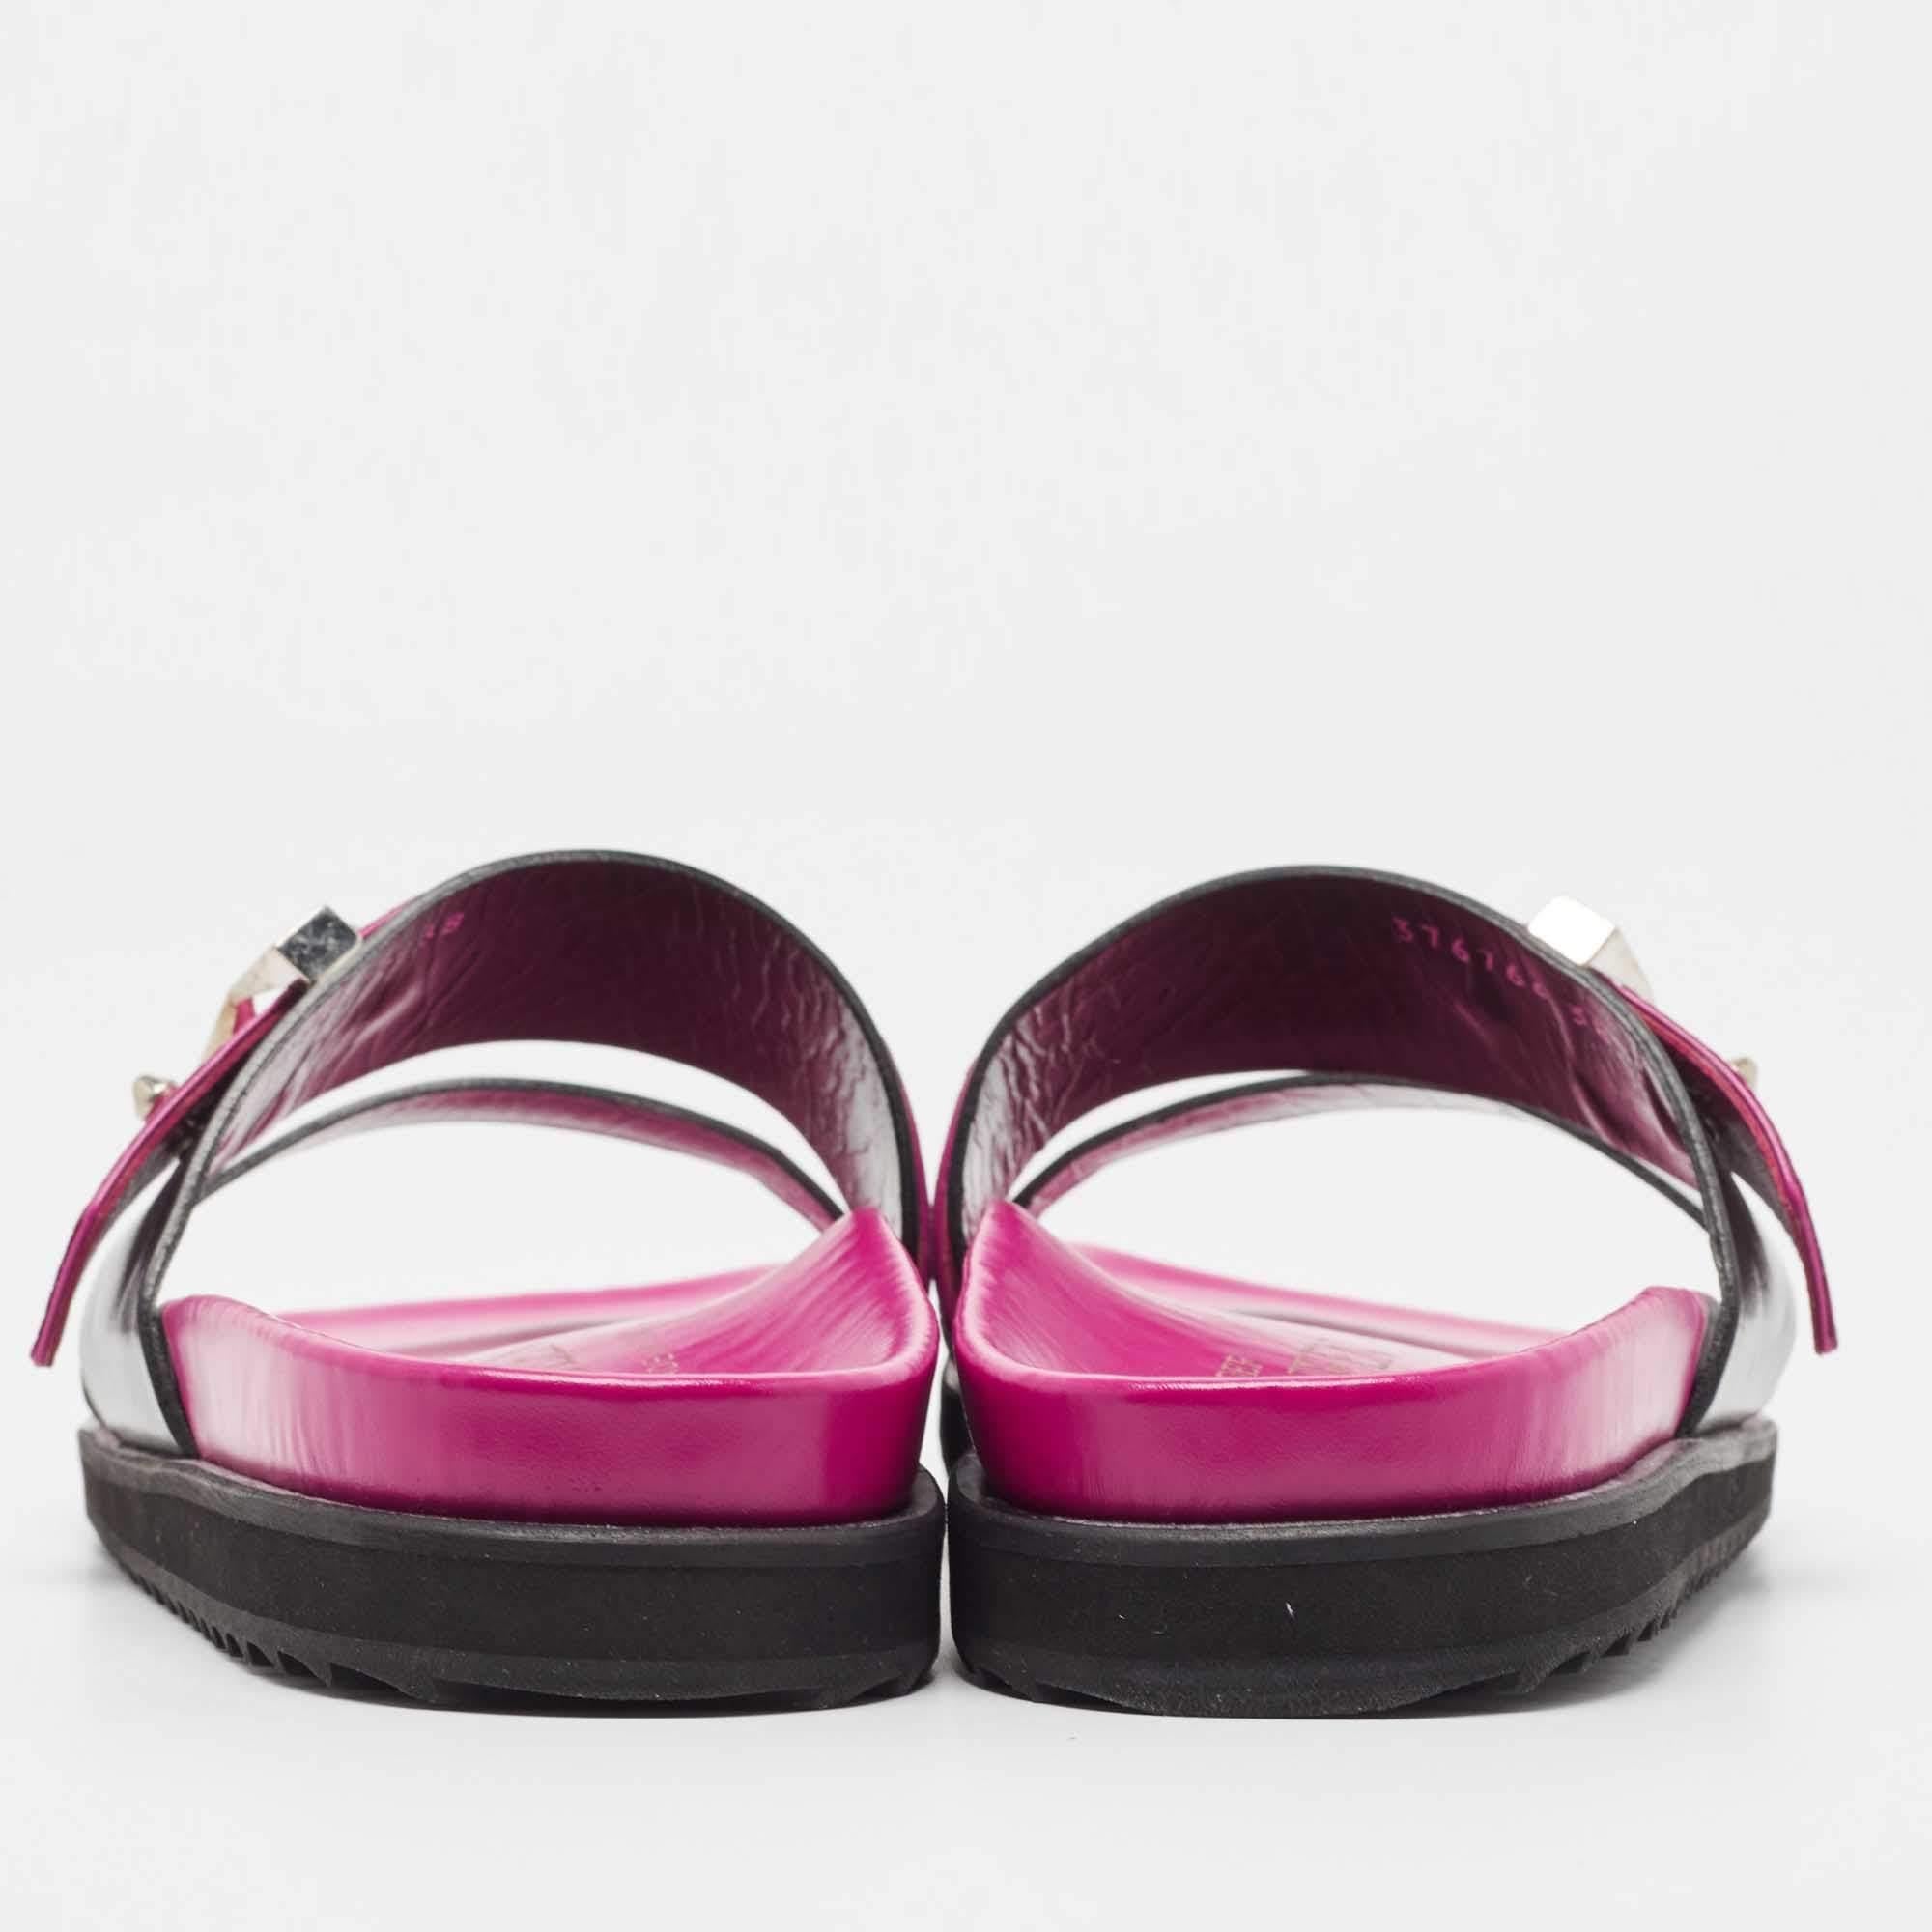 Alexander McQueen Pink/Black Ostrich Embossed and Leather Flat Sandals Size 38 1